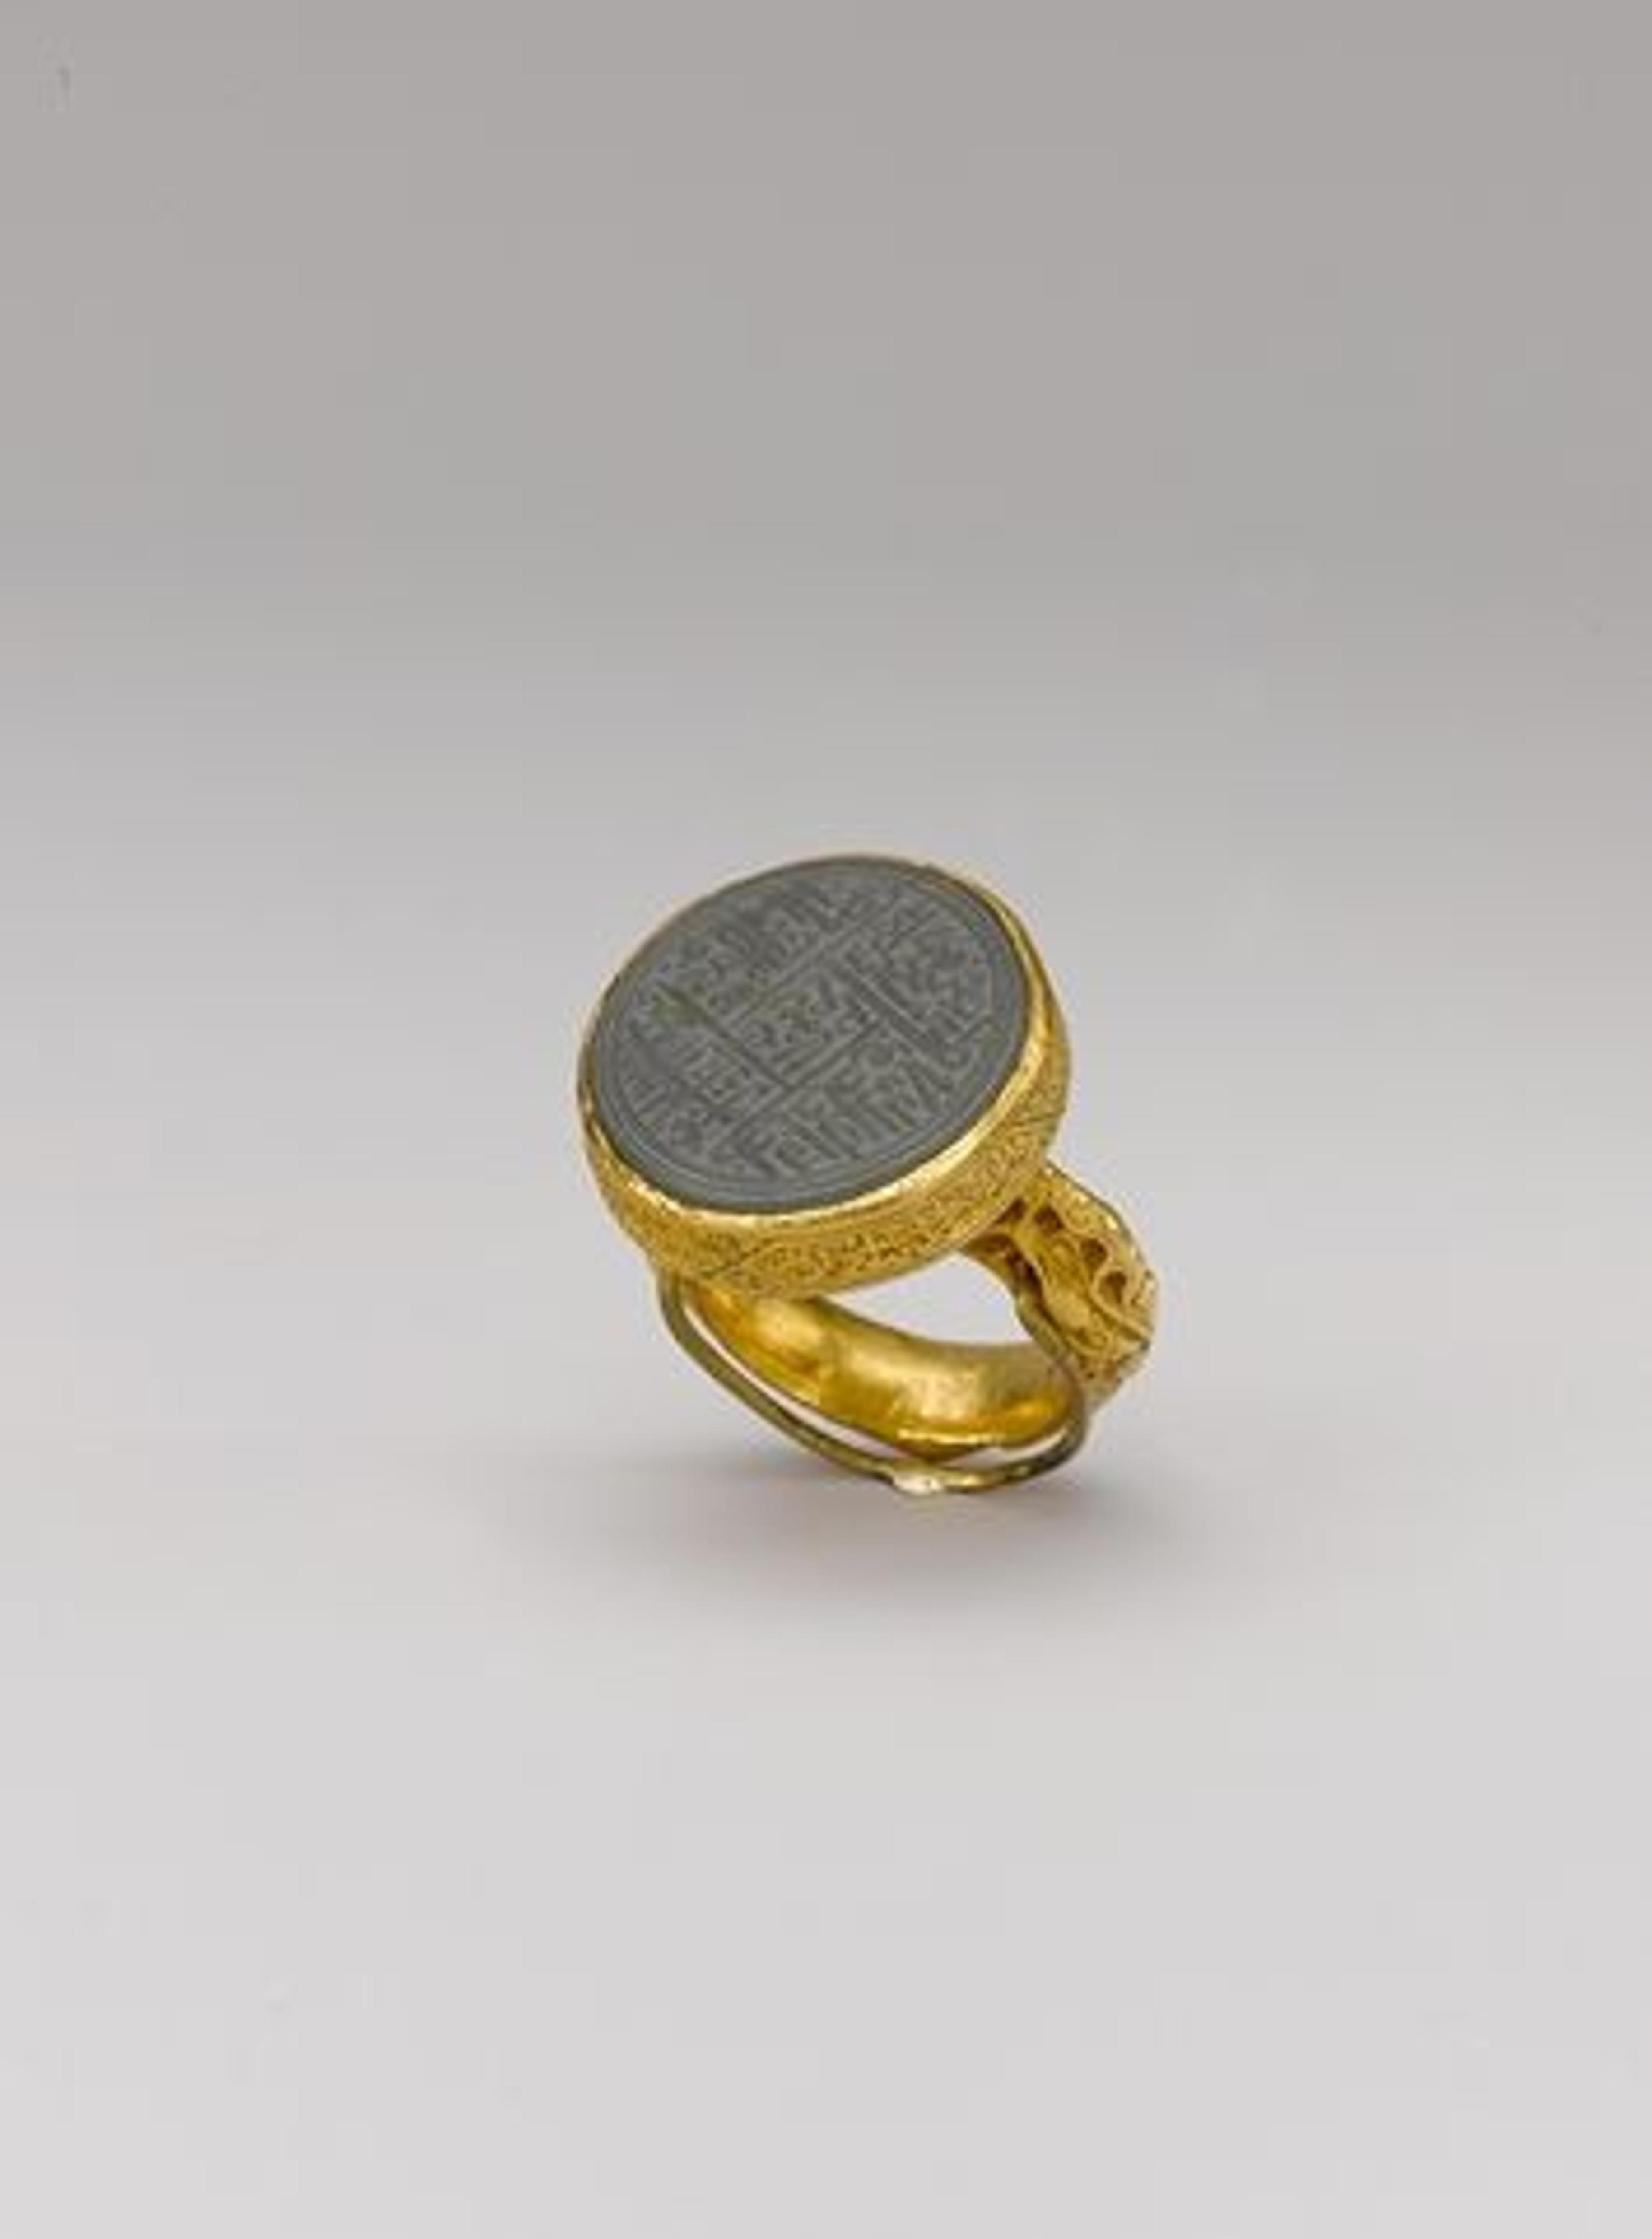 A seal ring with an inscription from late 15th–early 16th century Iran or Central Asia